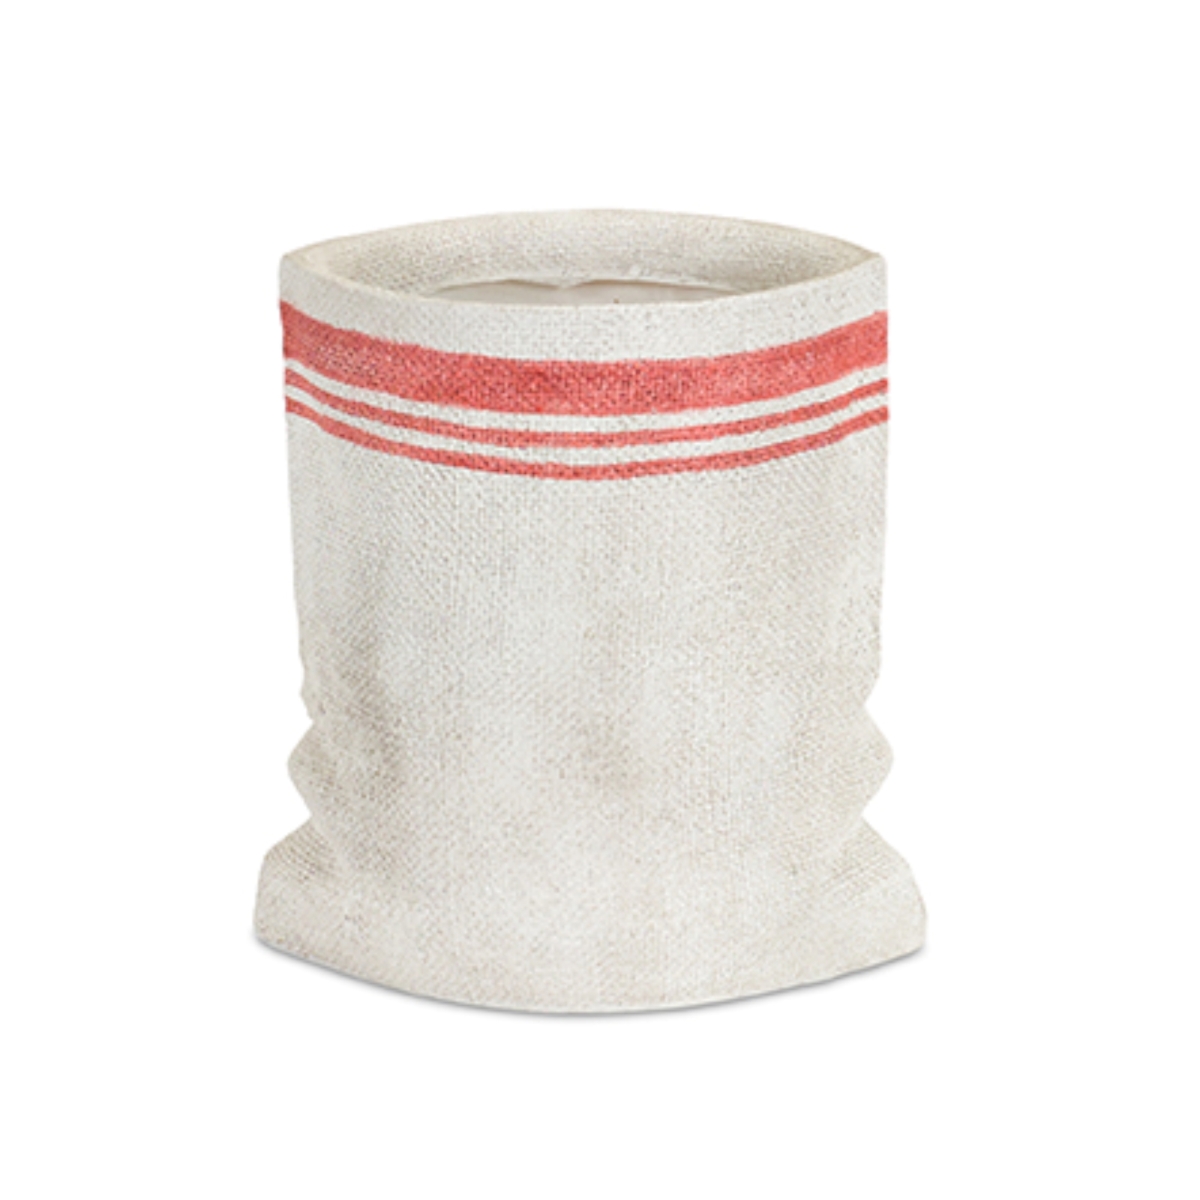 72645ds 11 In. Flour Sack Pot Poly Stone - White & Red